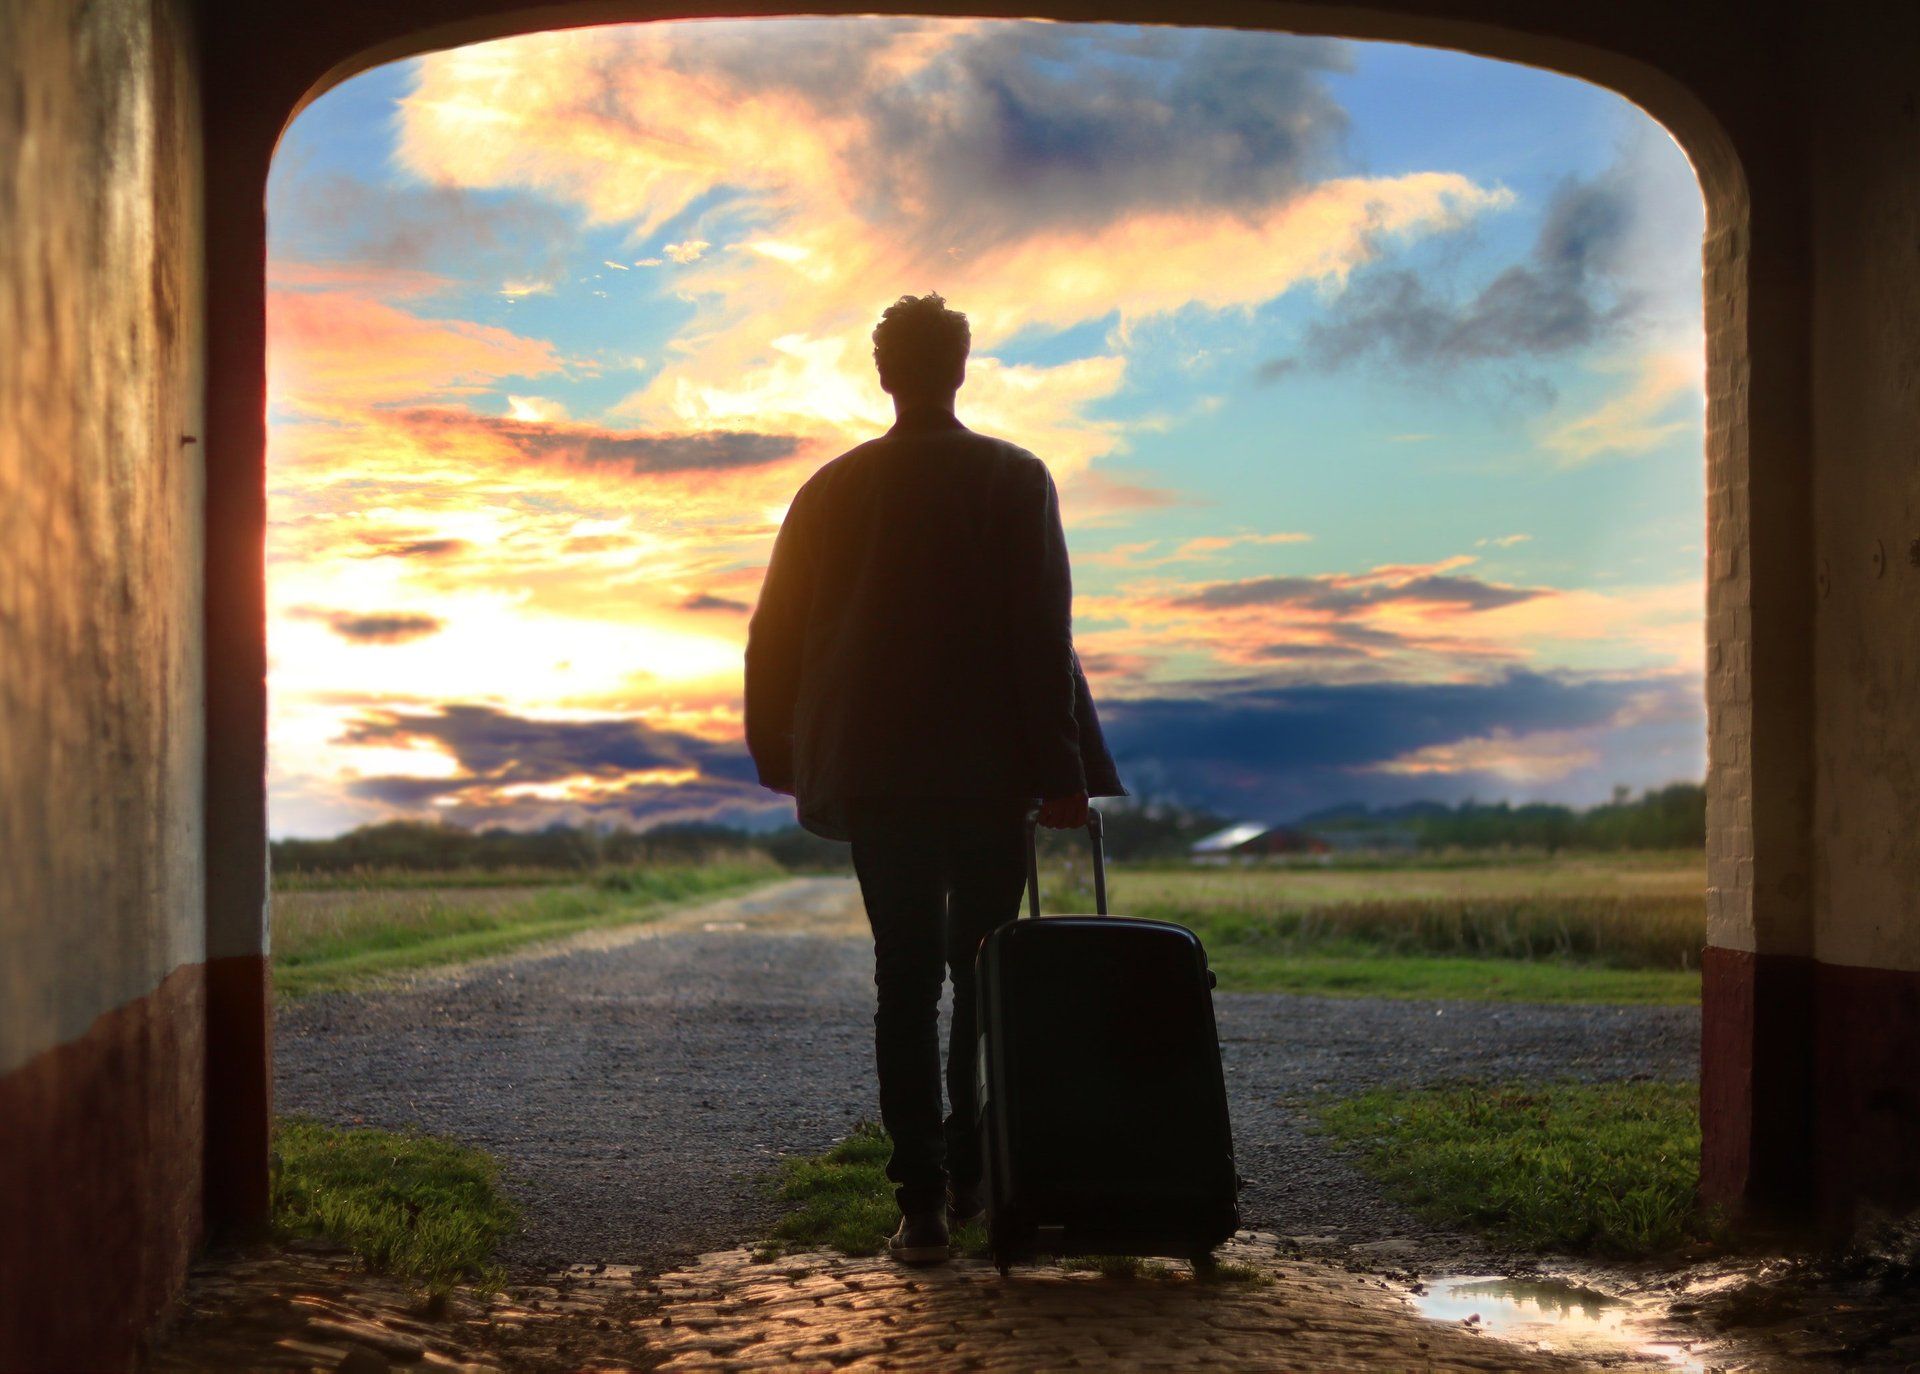 woman with suitcase in doorway looking out onto a wide open space with a colorful sunset